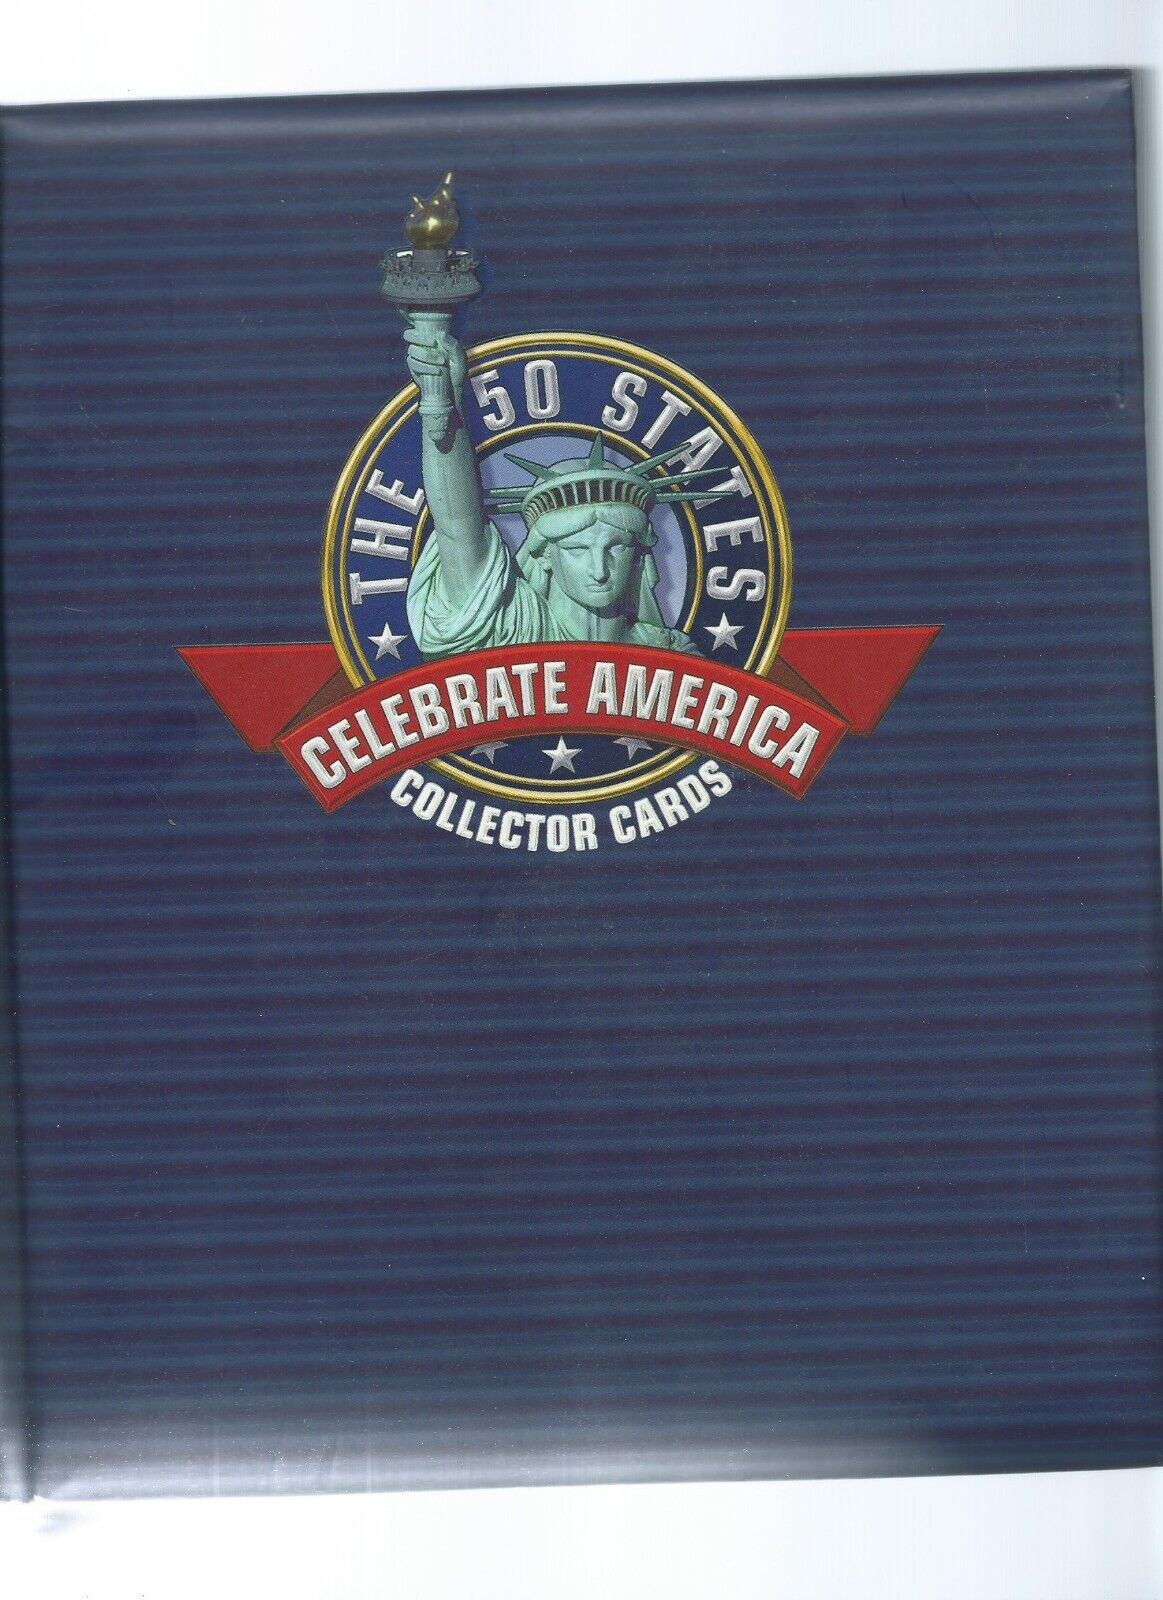 CELEBRATE AMERICA -- Complete cigarette State card set in leather like booklet